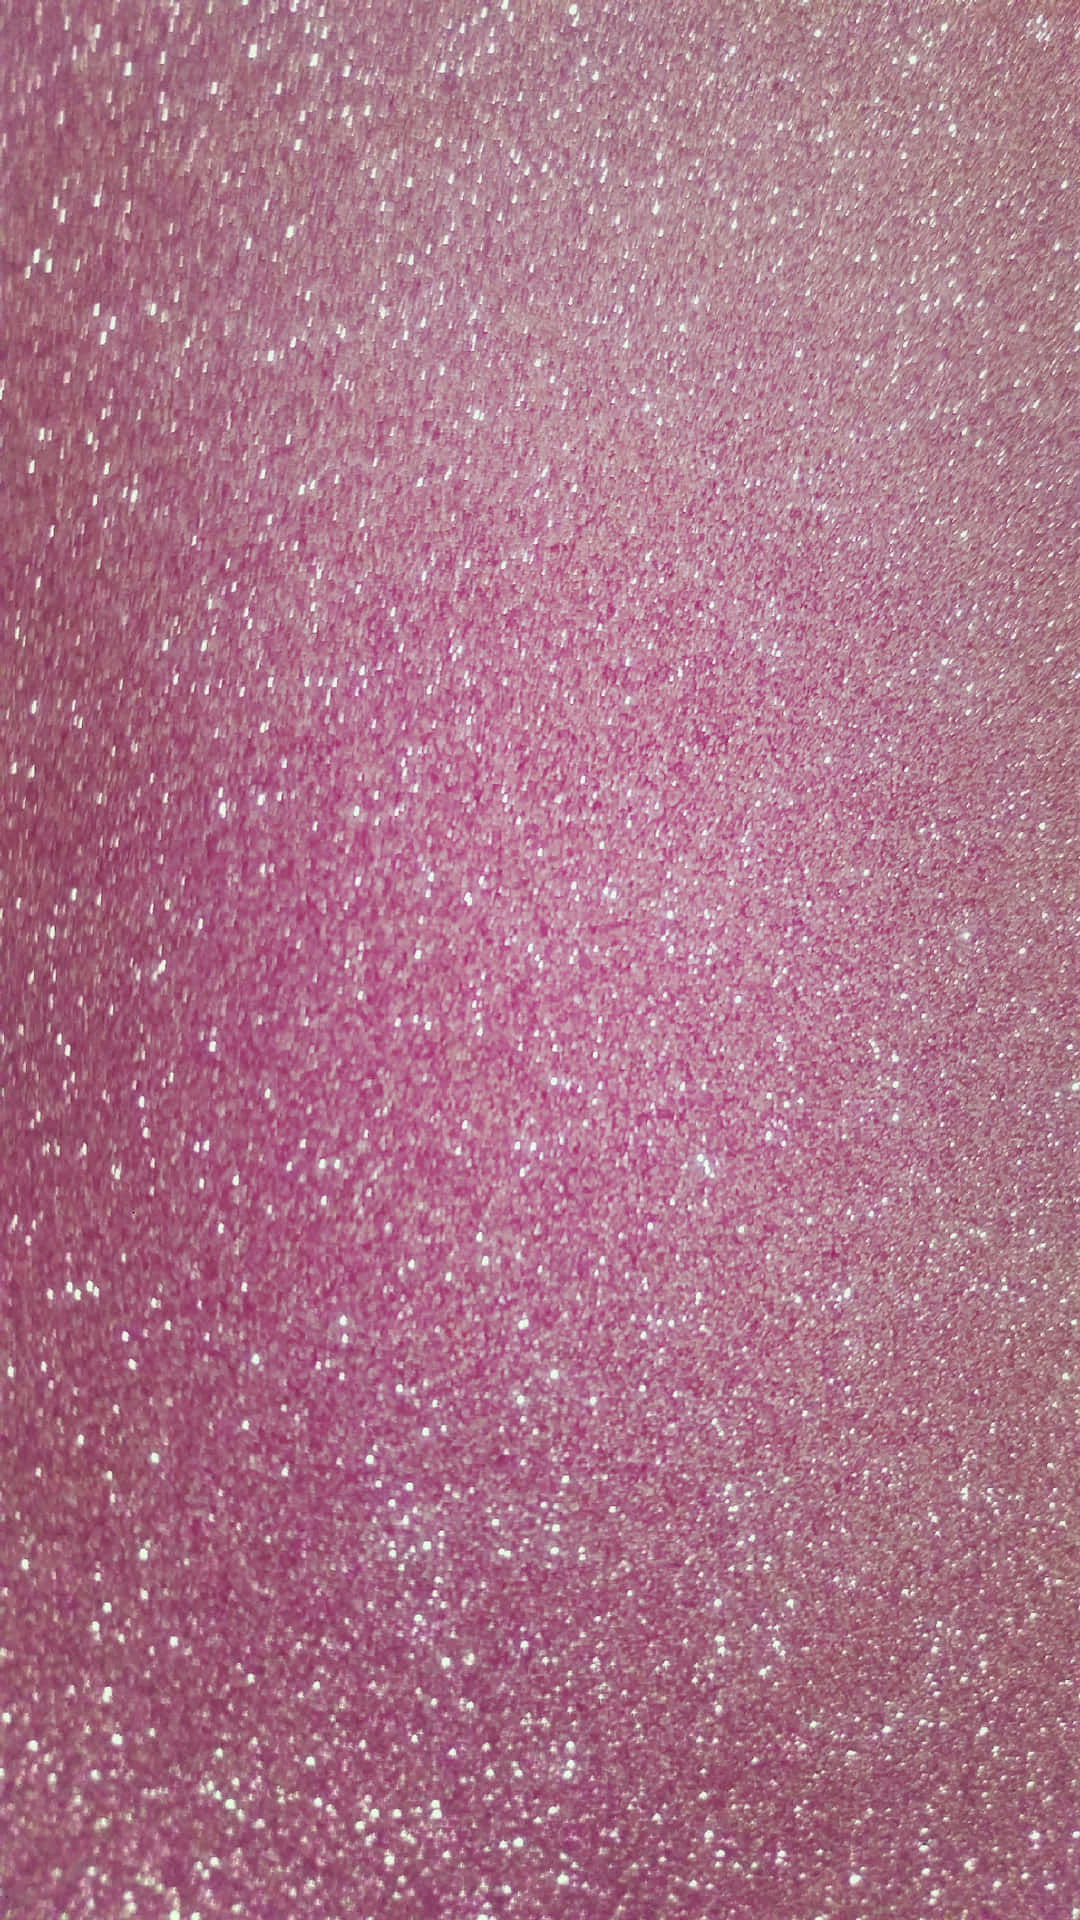 Get in a magical state of mind with this gorgeous Glitter Pink Background